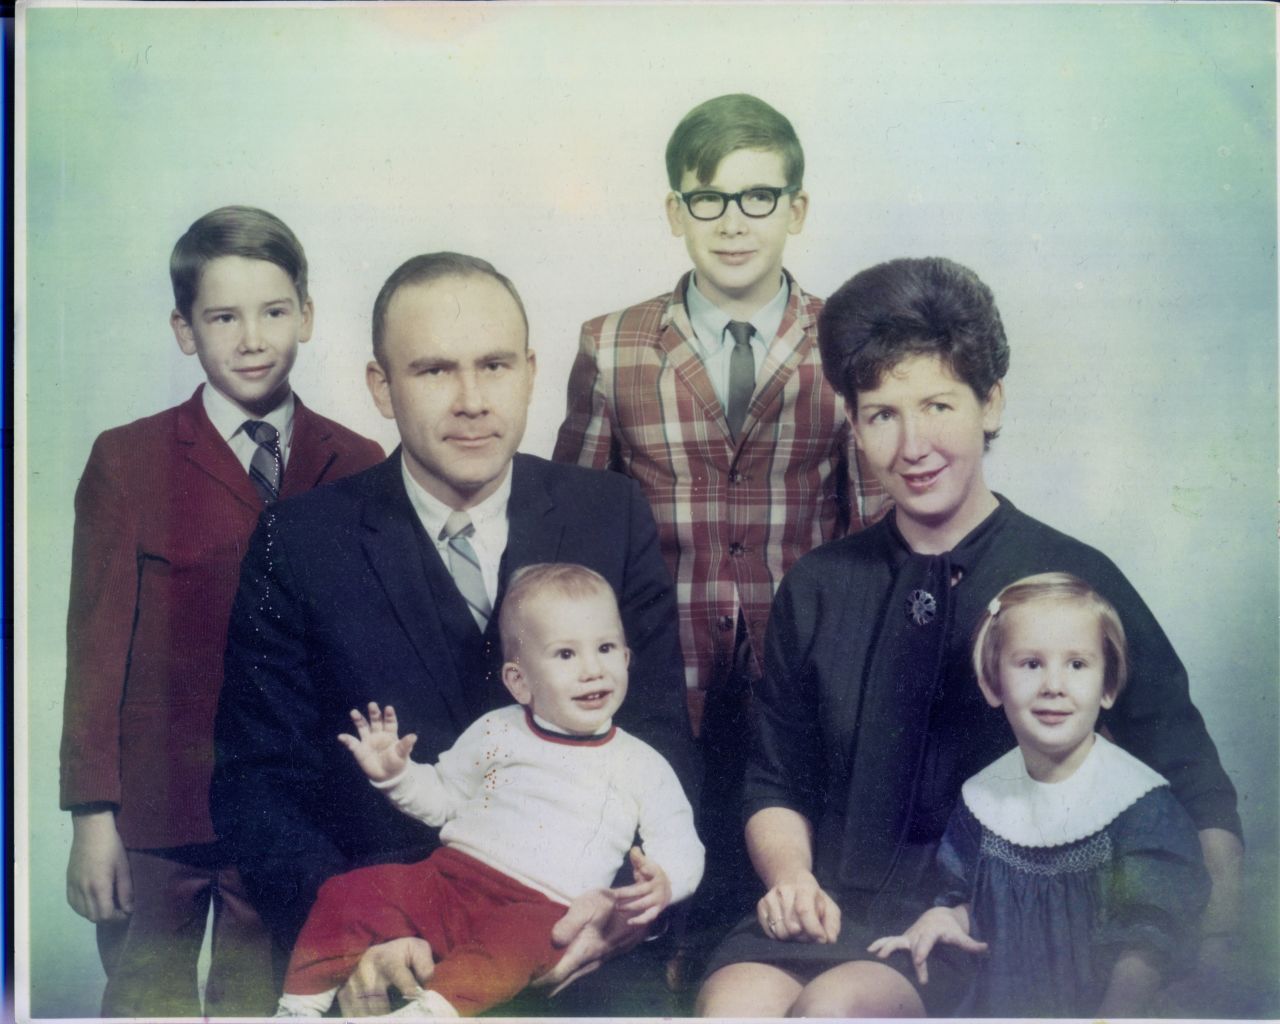 <a href="http://ireport.cnn.com/docs/DOC-948132">Cynthia Carr Falardeau</a> says this family photo from 1969 represents "a time of innocence." 